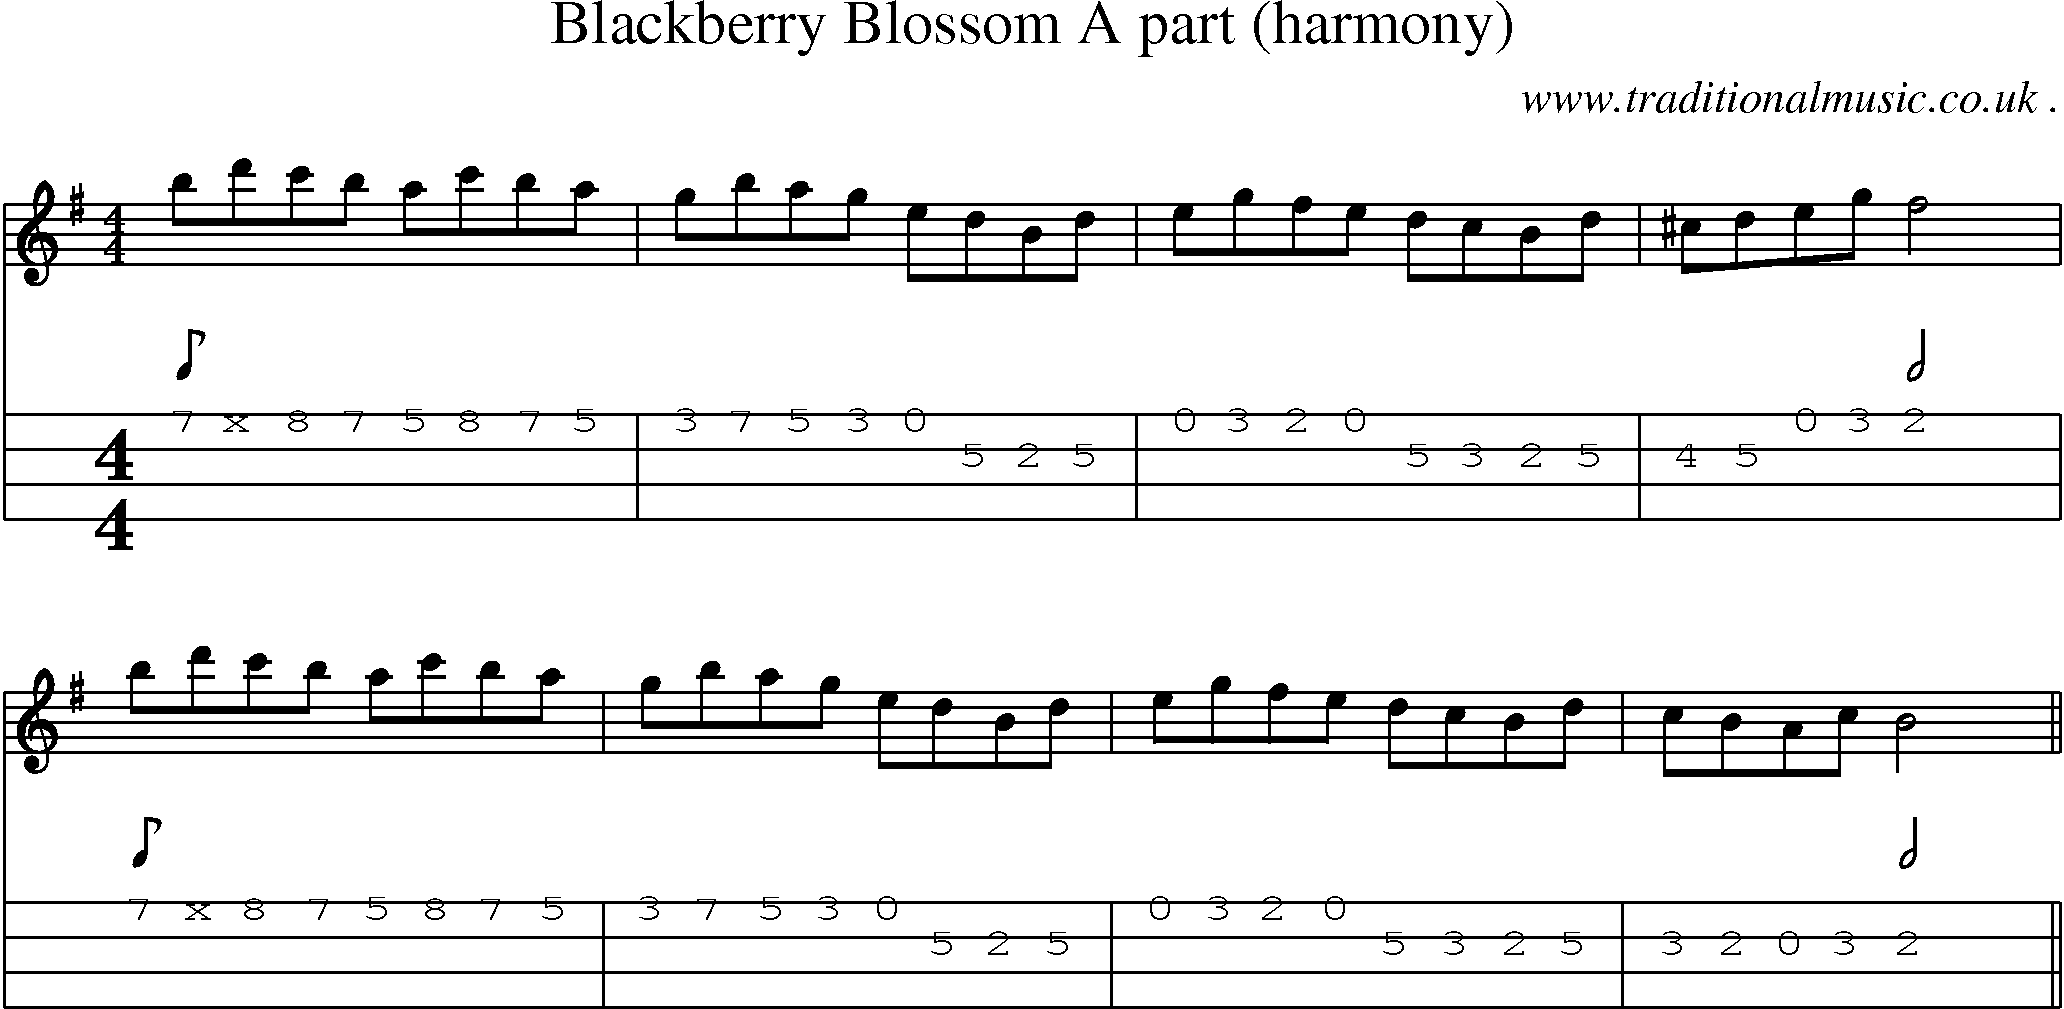 Music Score and Guitar Tabs for Blackberry Blossom A Part (harmony)